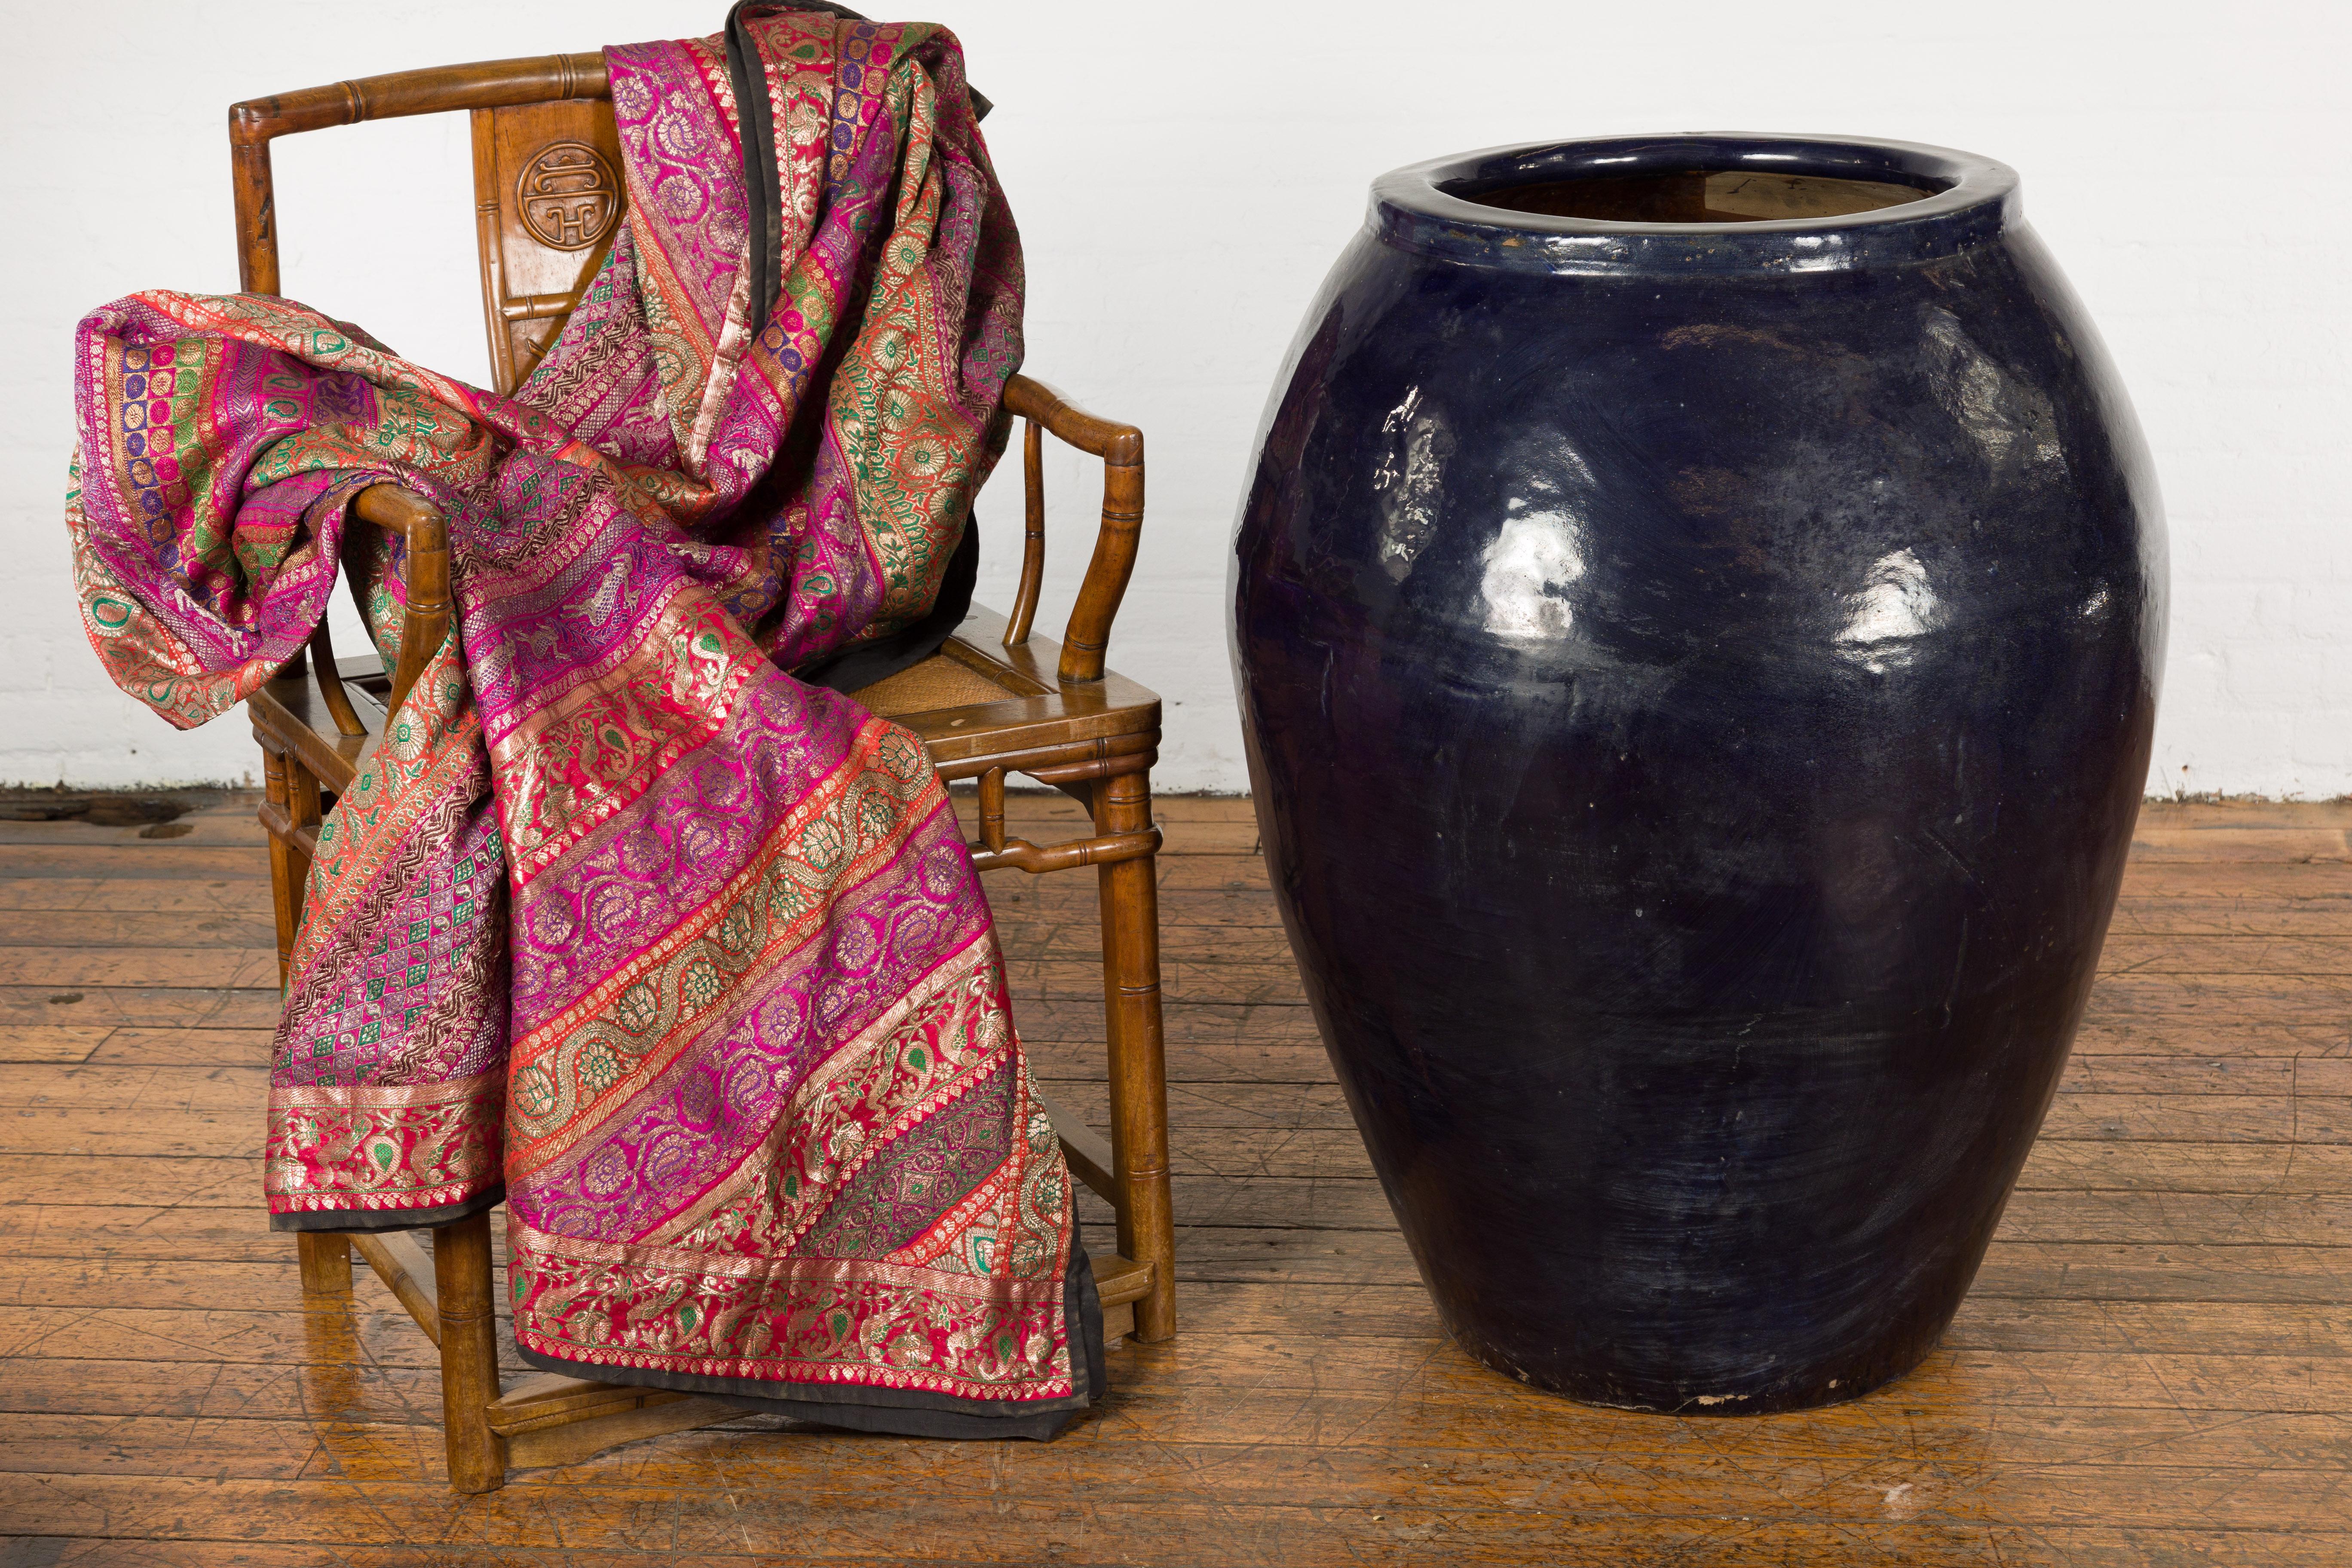 An oversized vintage Thai water vessel from the mid-20th century, with midnight blue glaze, and tapering lines. Created in Thailand during the mid-century period, this oversized water vessel features a circular opening measuring 17.5 inches of